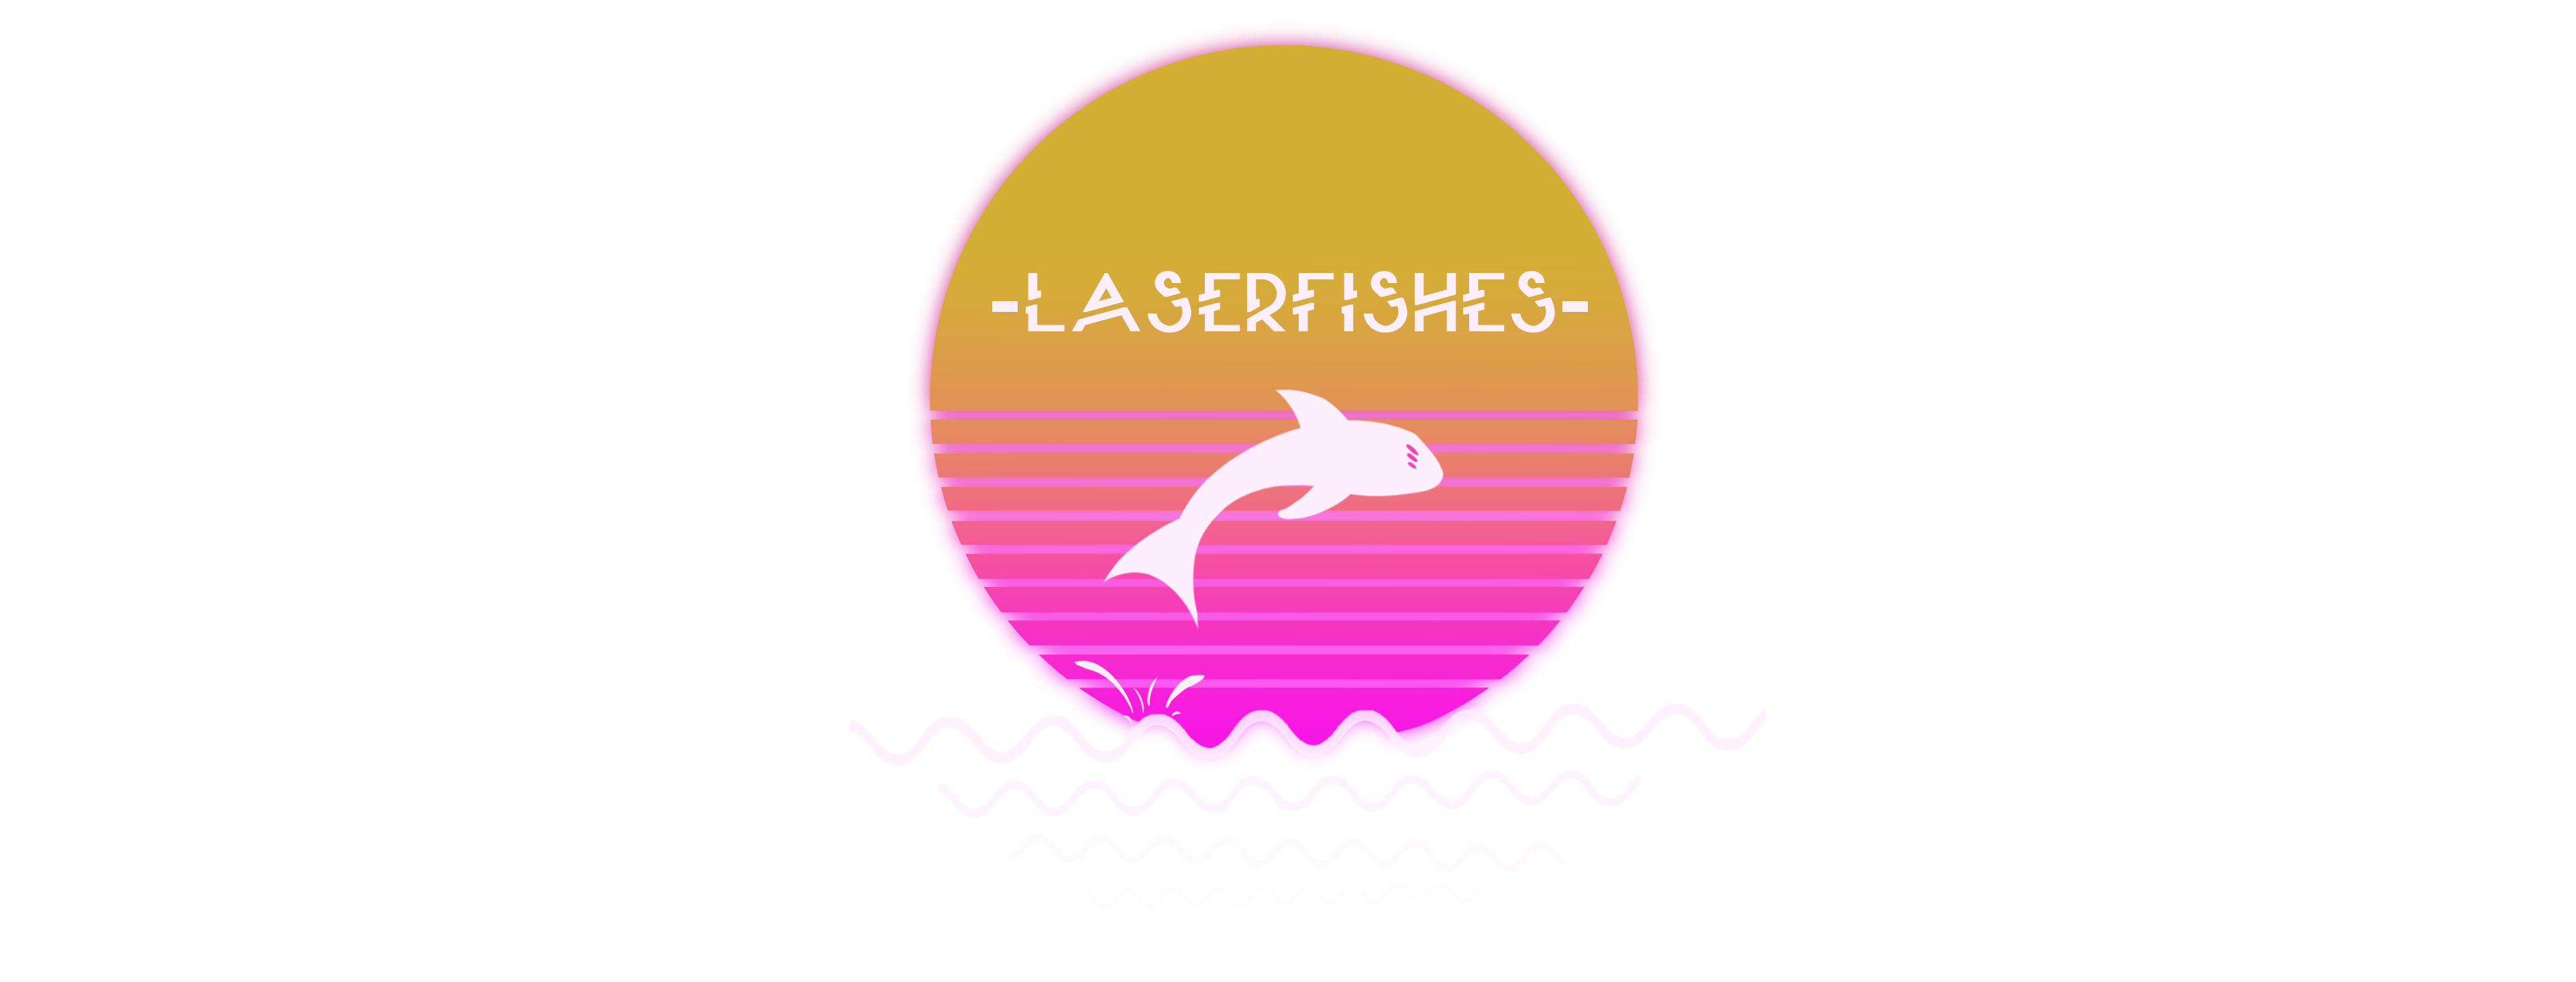 Laserfishes